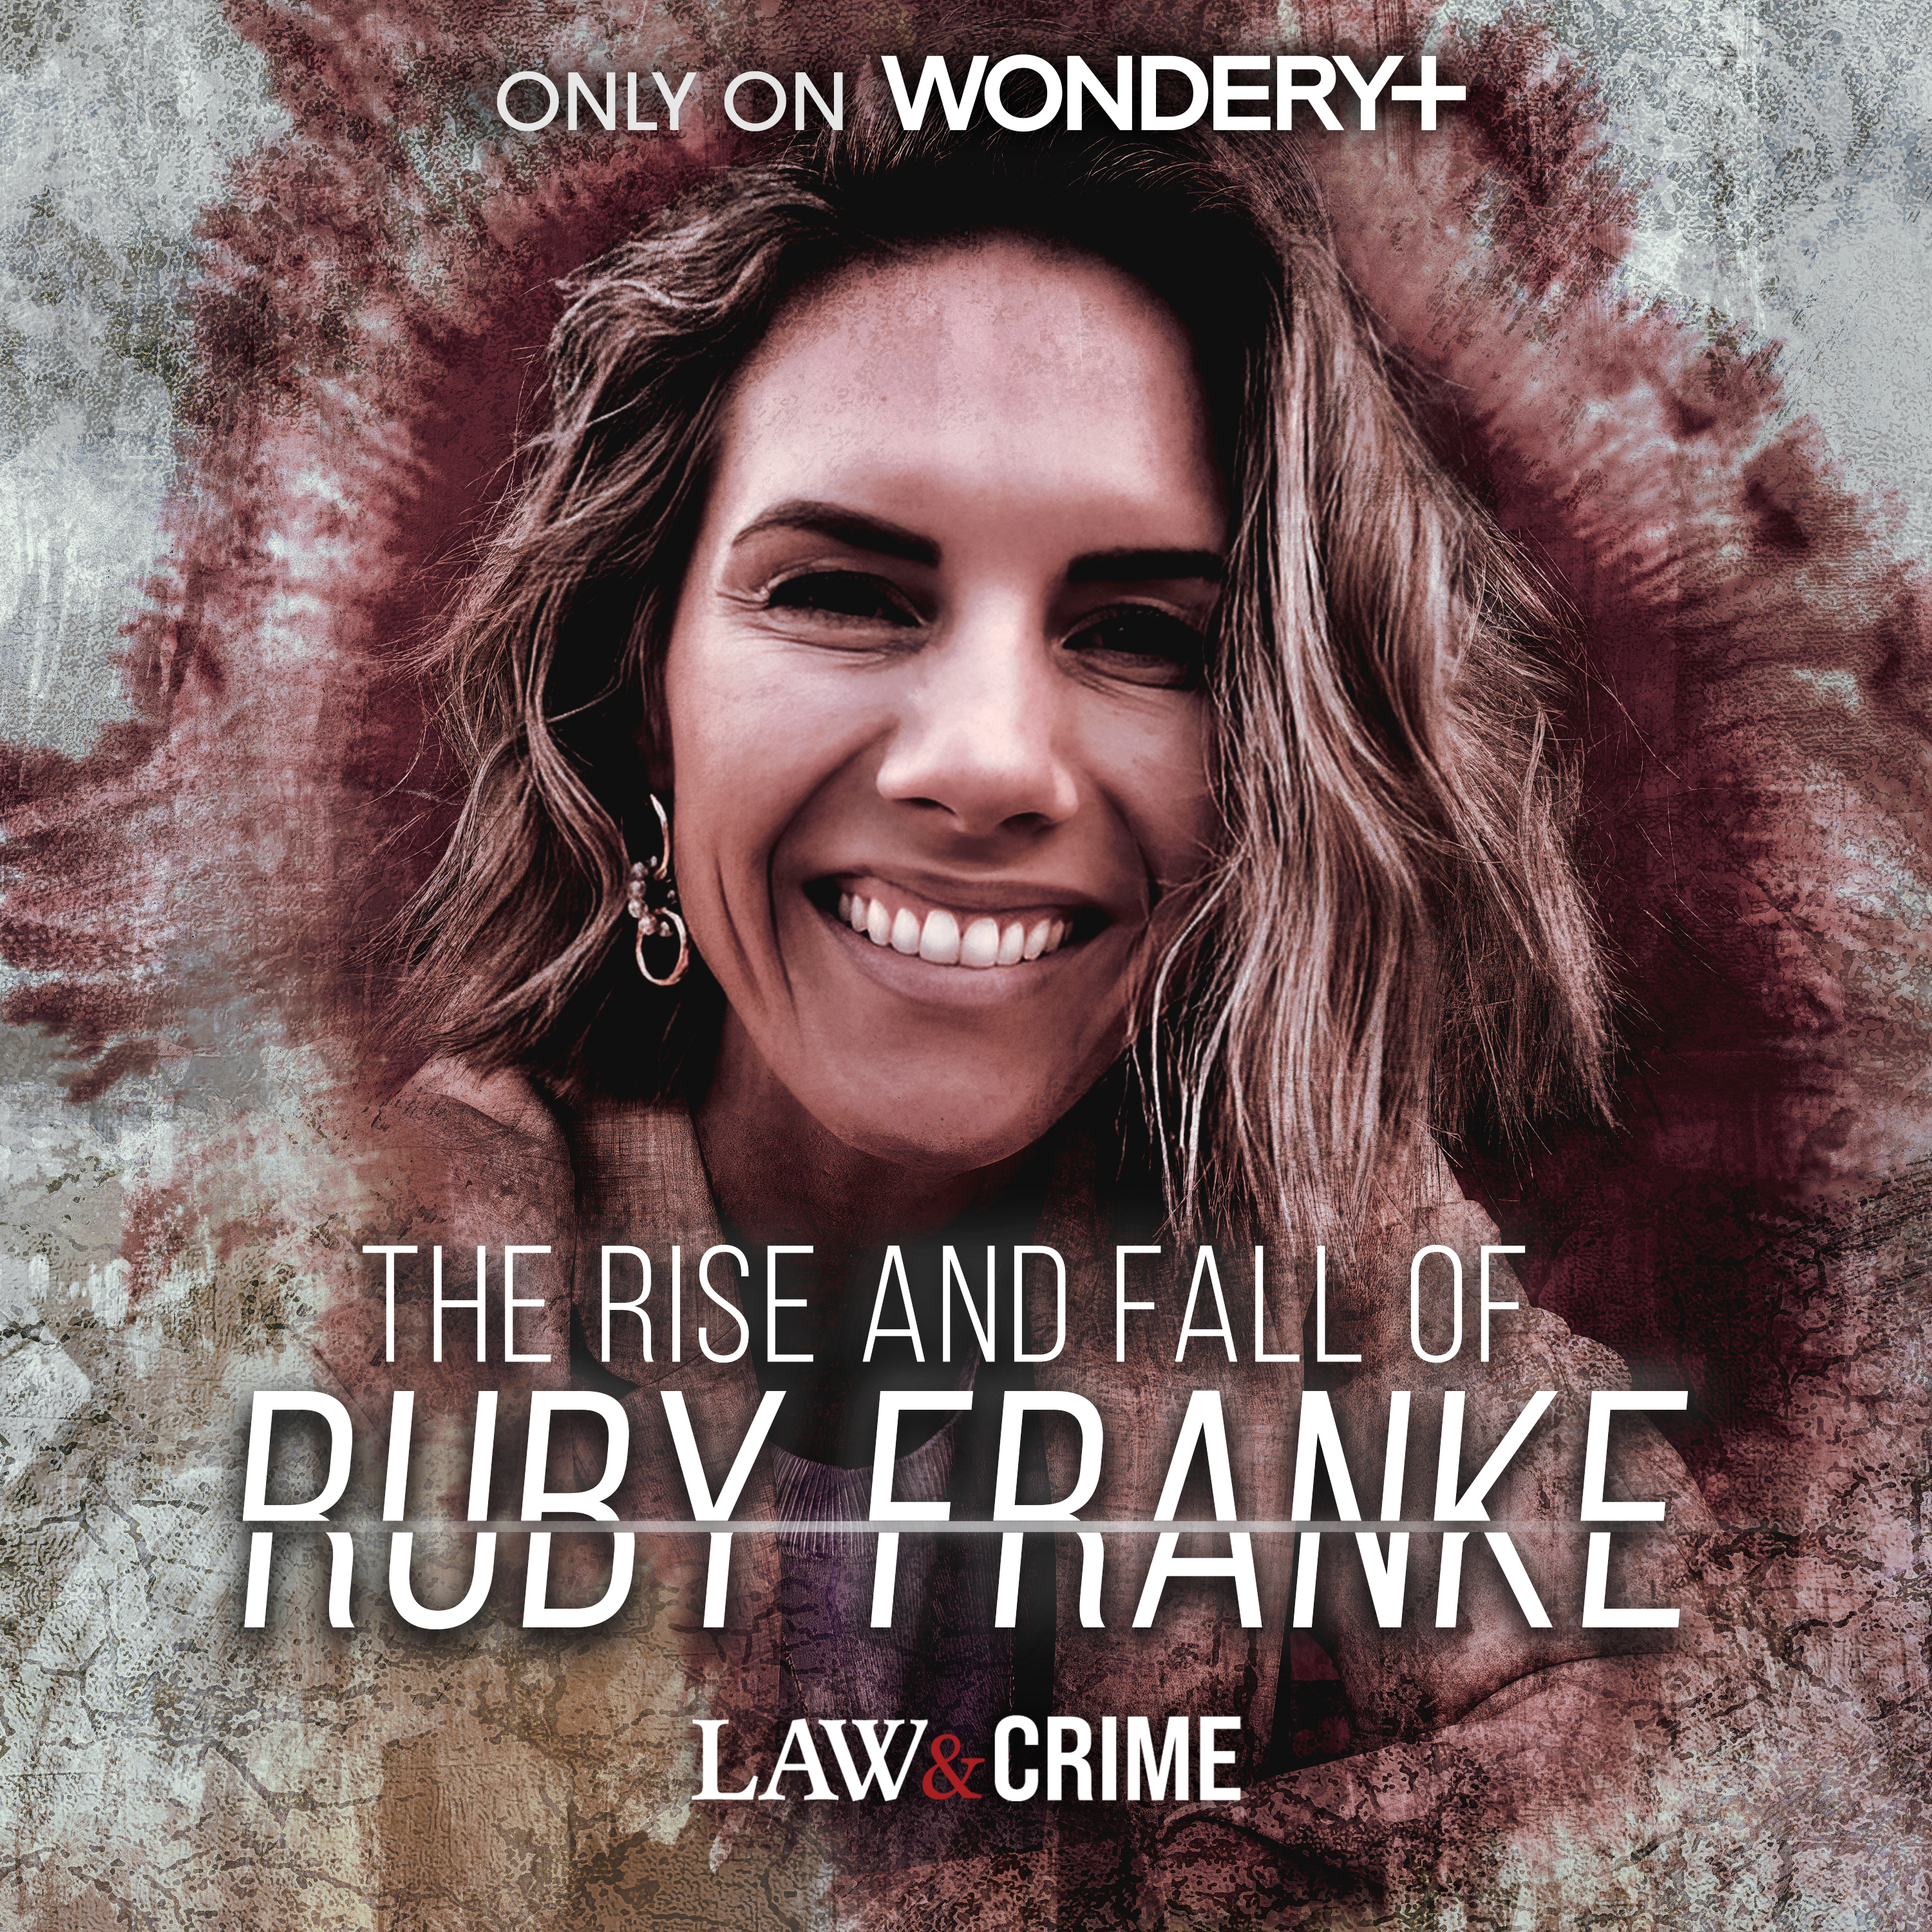 The Rise and Fall of Ruby Franke by Law&Crime | Wondery